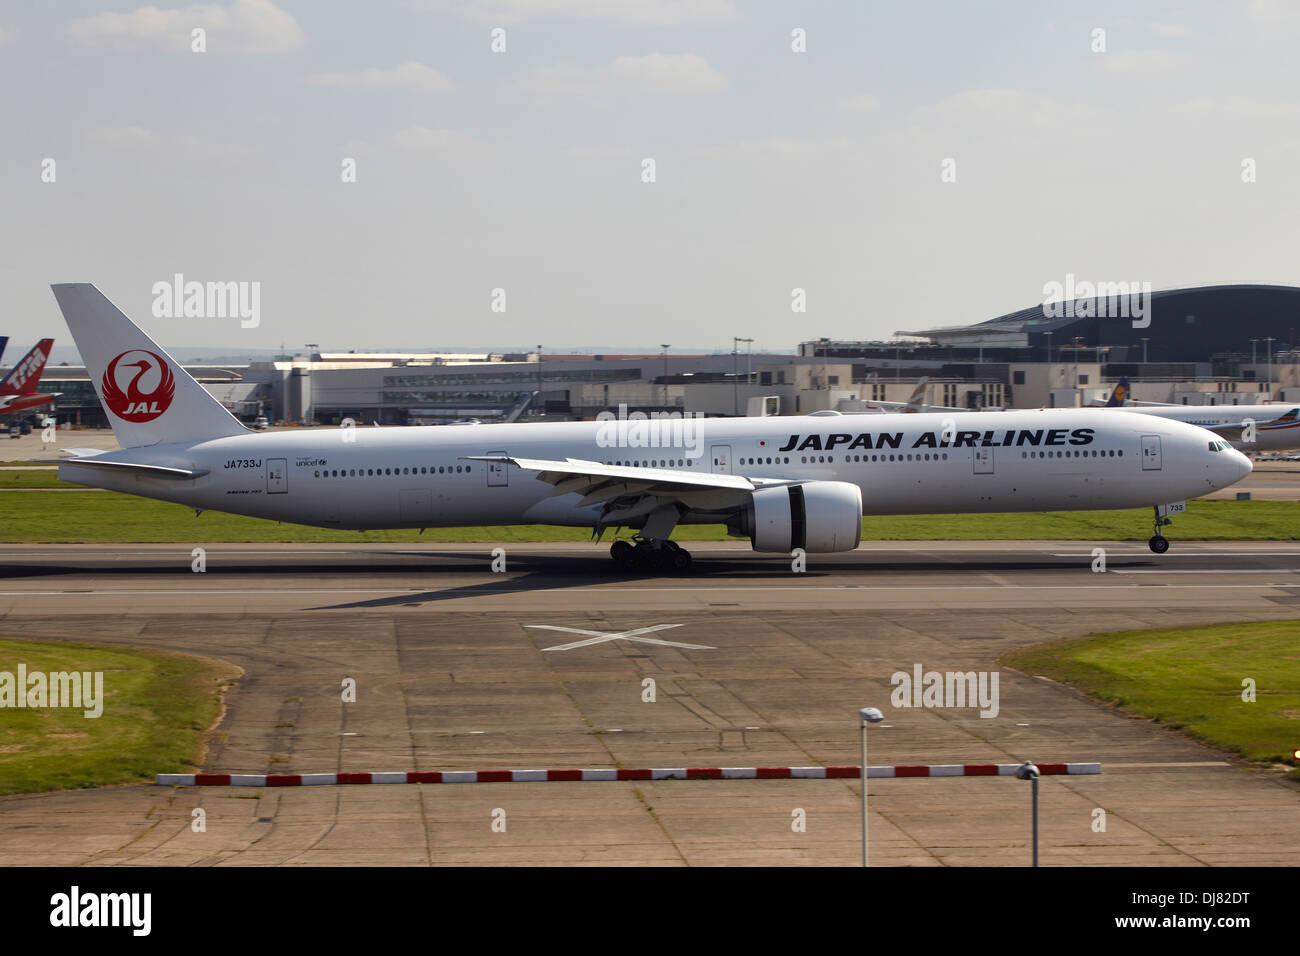 Japan Airlines Boeing 777 landing at London Heathrow Airport Stock Photo